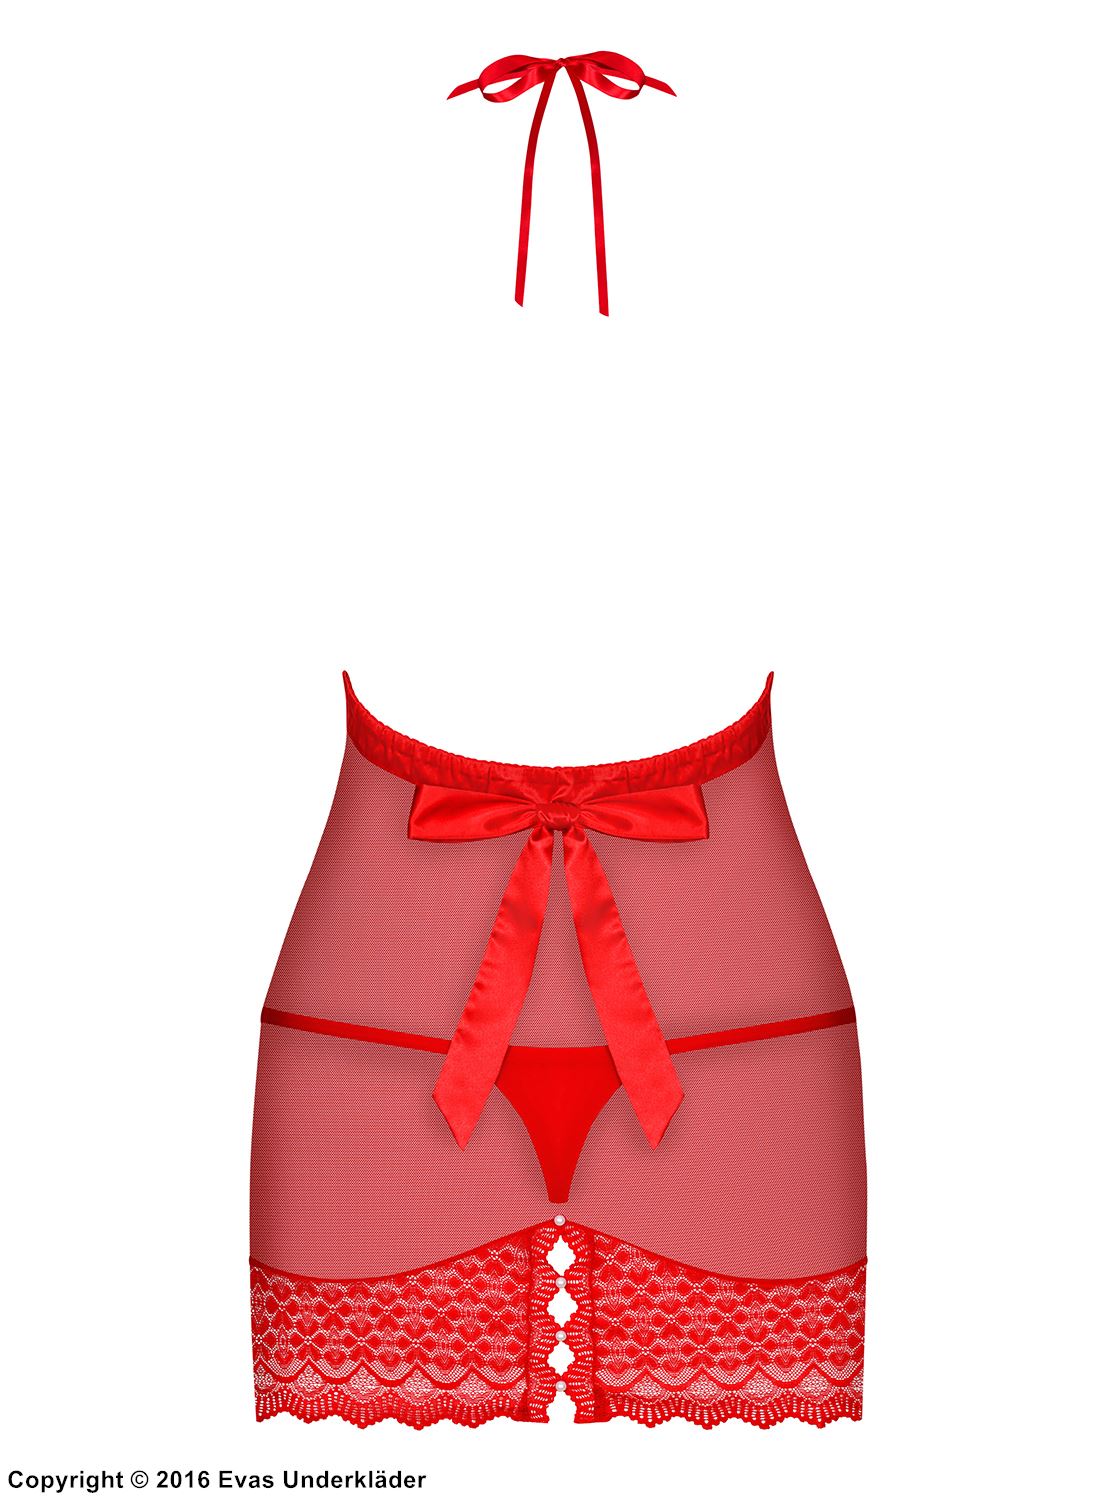 Skin-tight chemise, see-through mesh, lace inlays